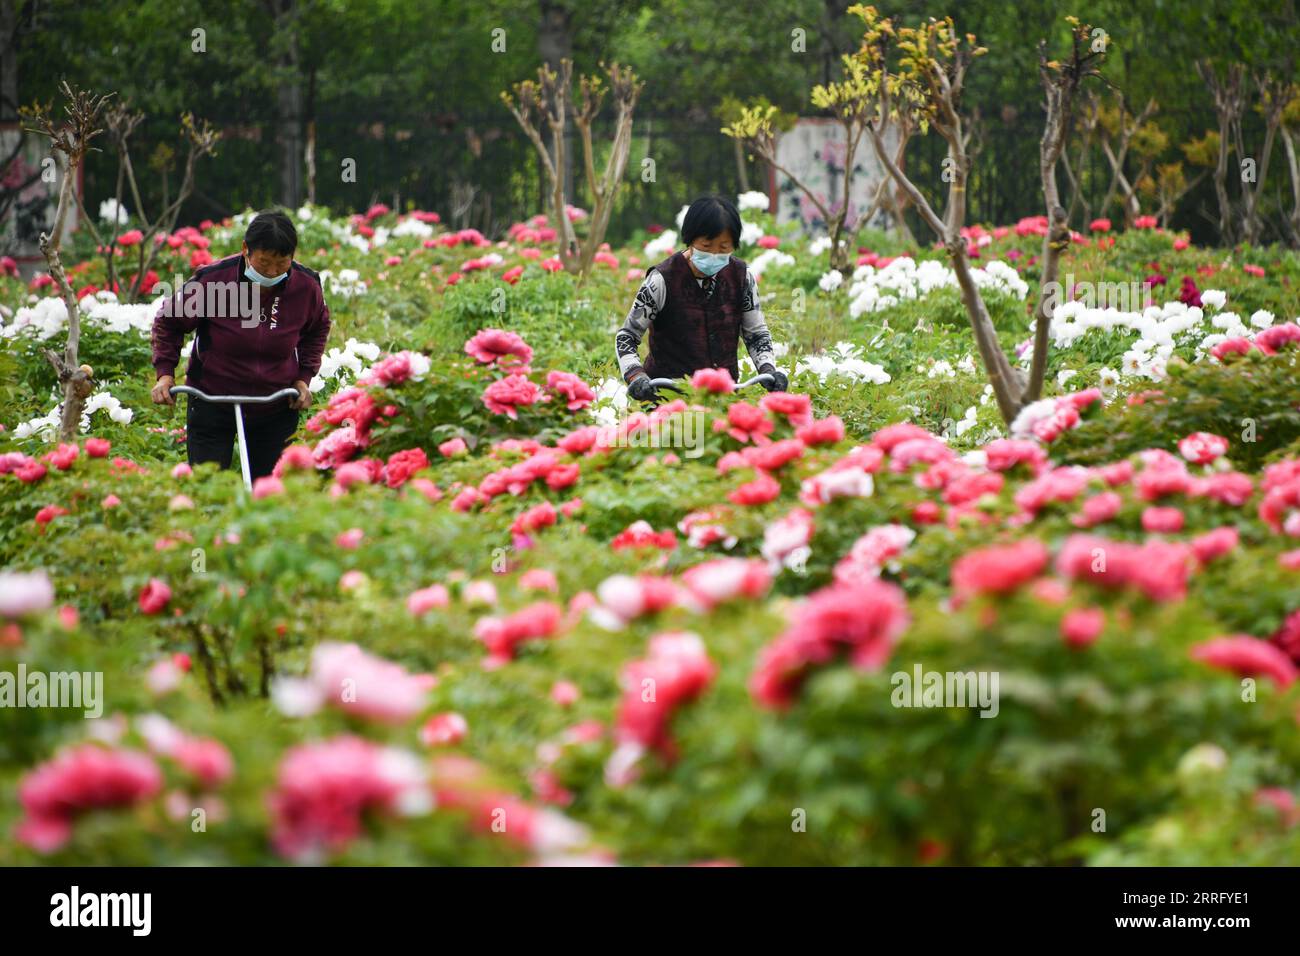 220430 -- JINAN, April 30, 2022 -- Farmers work at a peony plantation in Heze City, east China s Shandong Province, April 14, 2022.  Xinhua Headlines: China taps local speciality industries to push rural vitalization ZhuxZheng PUBLICATIONxNOTxINxCHN Stock Photo